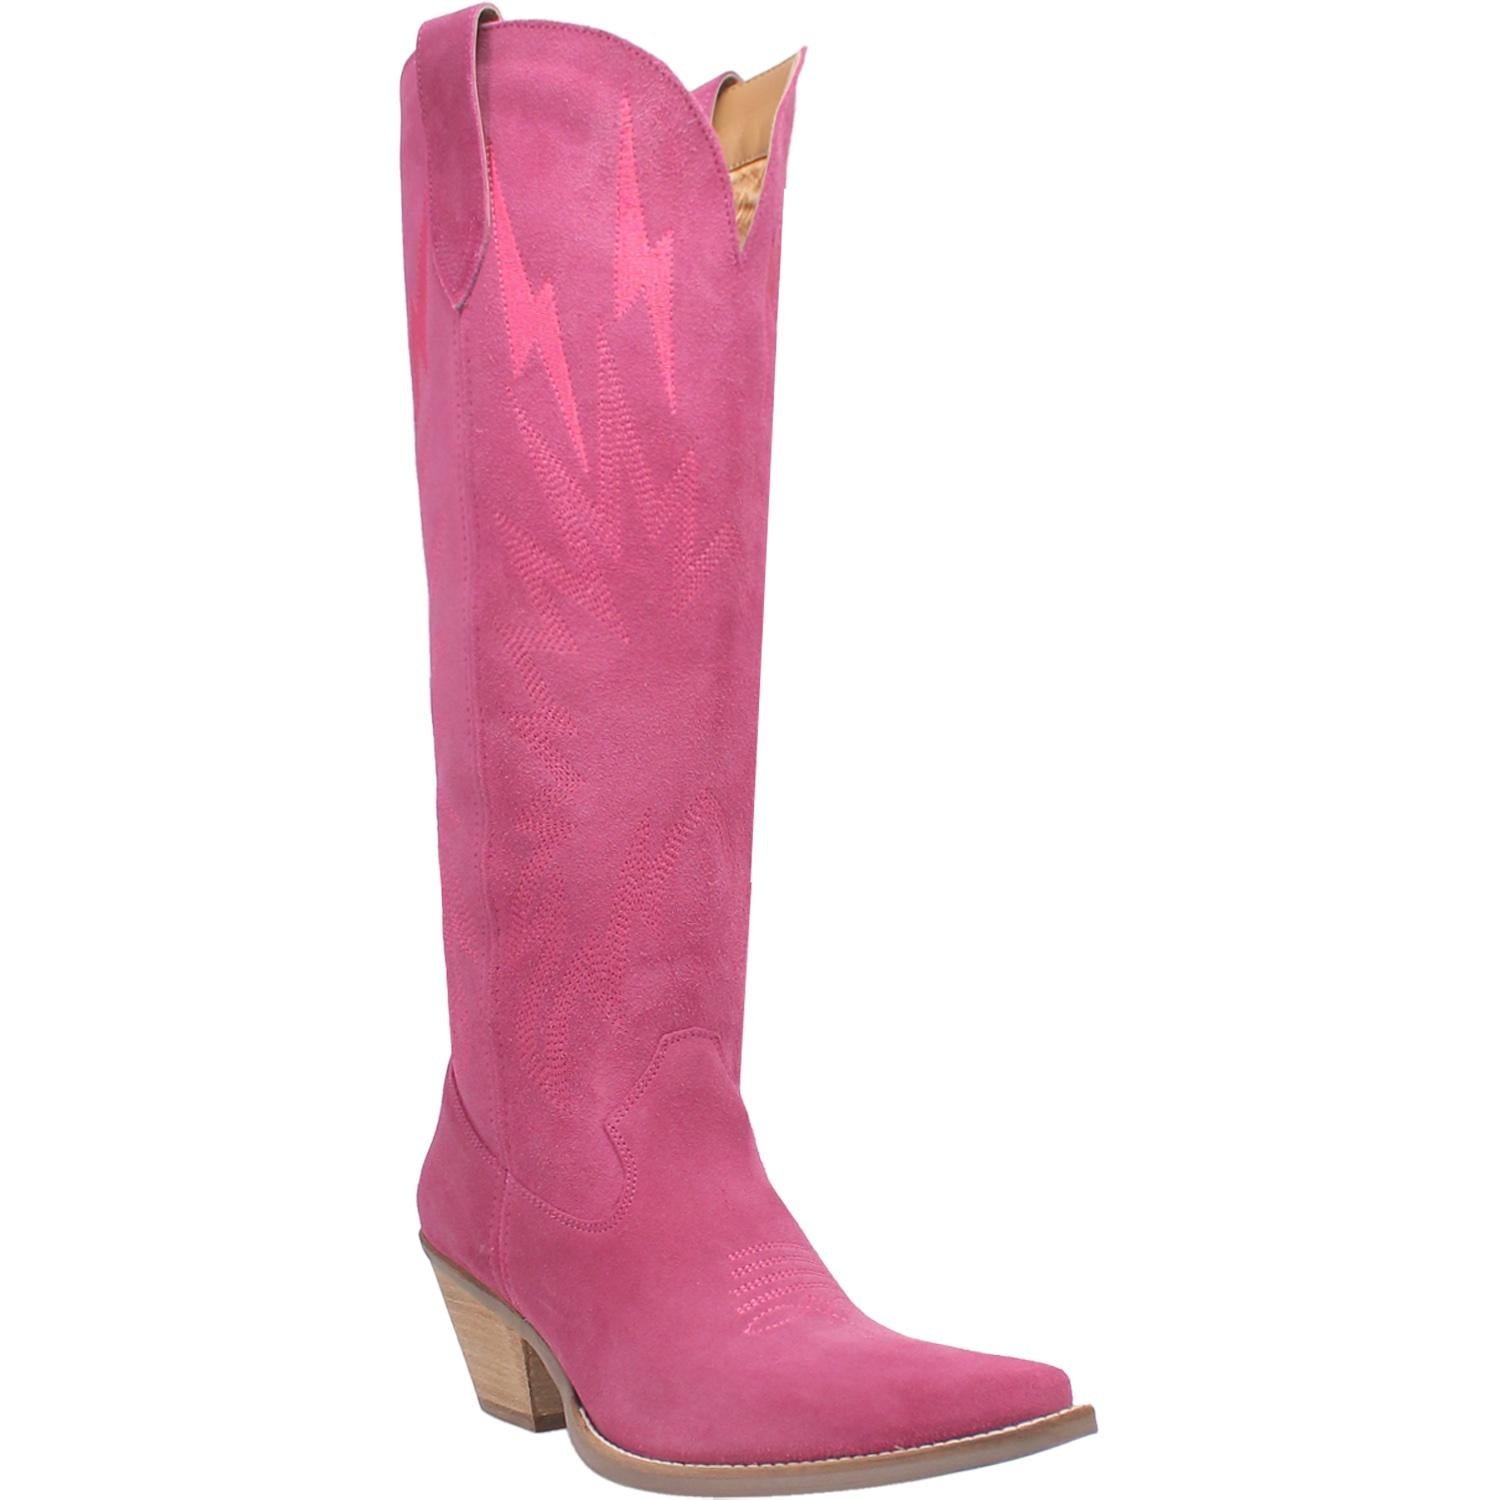 A tall fuchsia boot featuring rhinestone lightning designs, small heel, leather straps, and a V cut at the top. Item is pictured on a plain white background